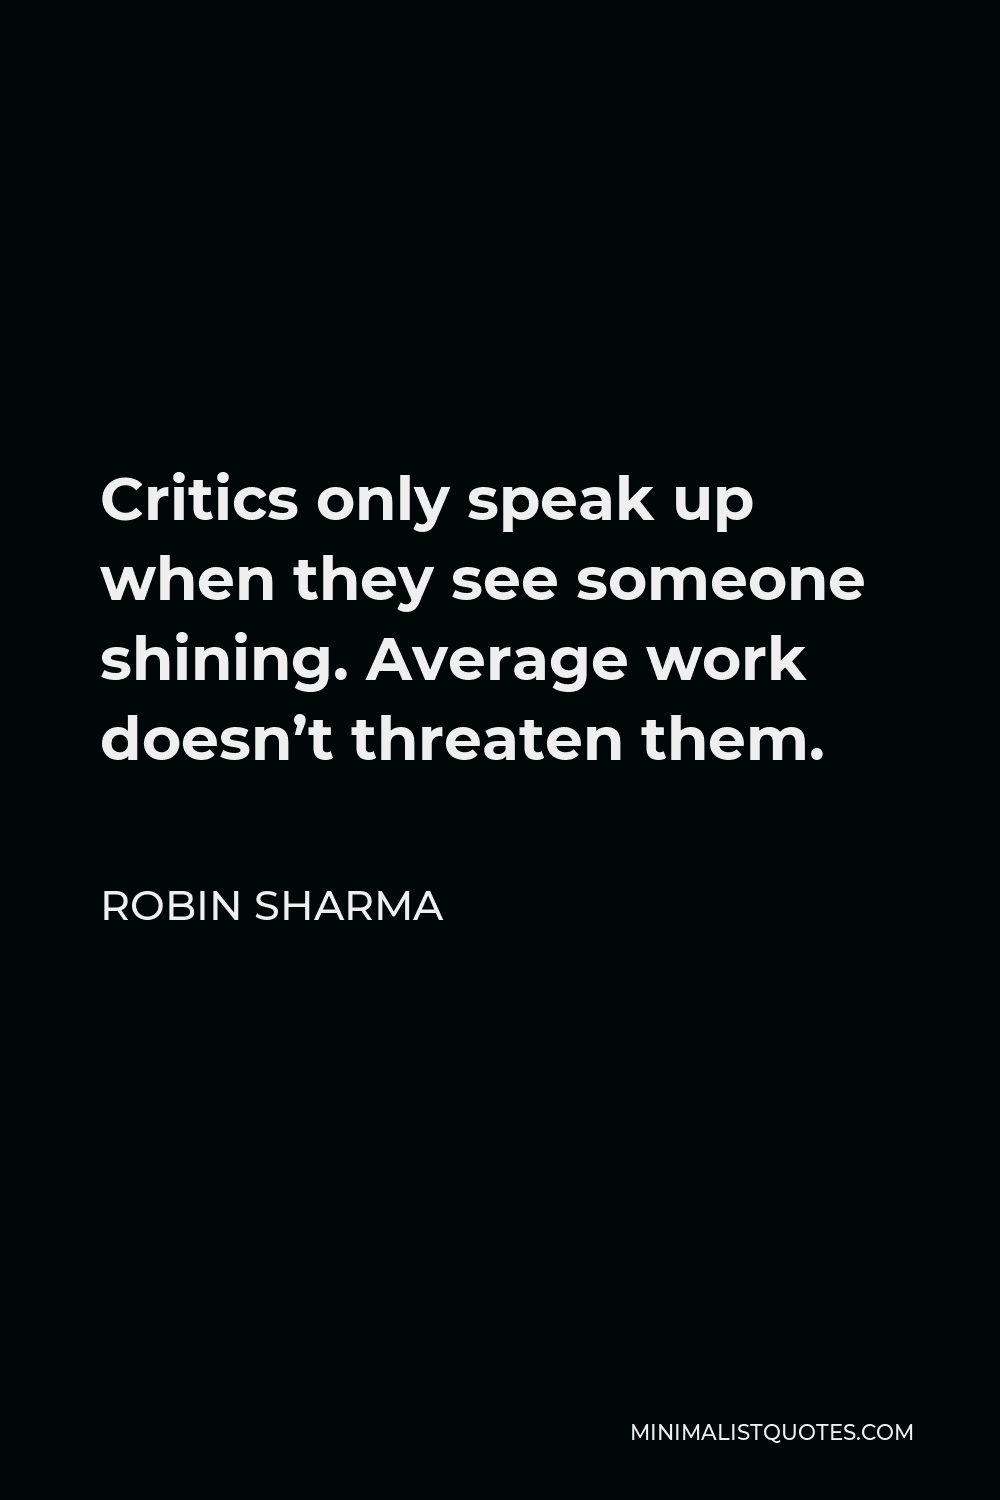 Robin Sharma Quote - Critics only speak up when they see someone shining. Average work doesn’t threaten them.